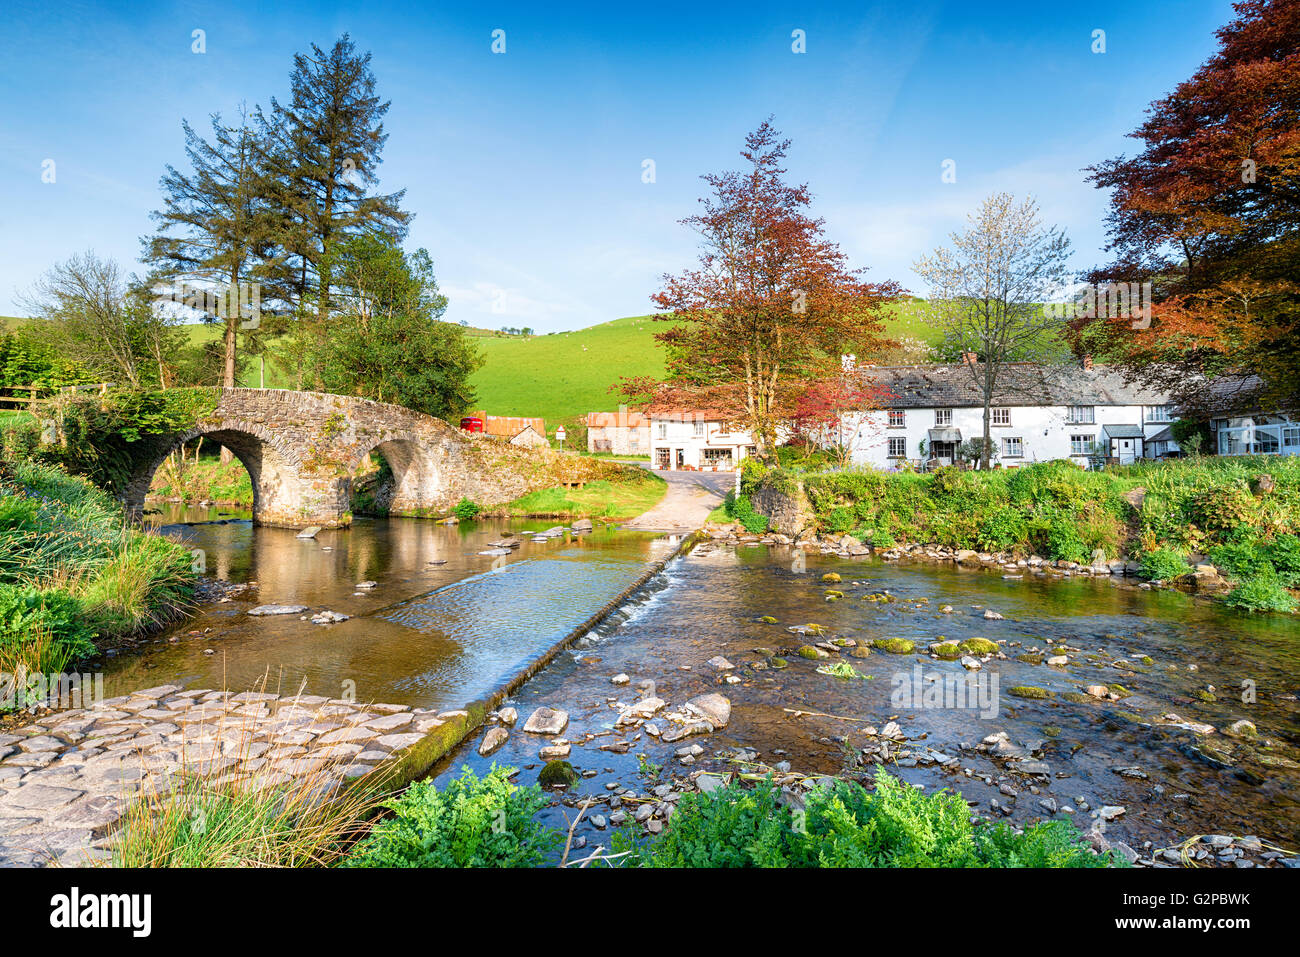 The bridge and ford at the picturesque hamlet of Malmsmead in the Doone Valley directly on the border between Somerset and Devon Stock Photo